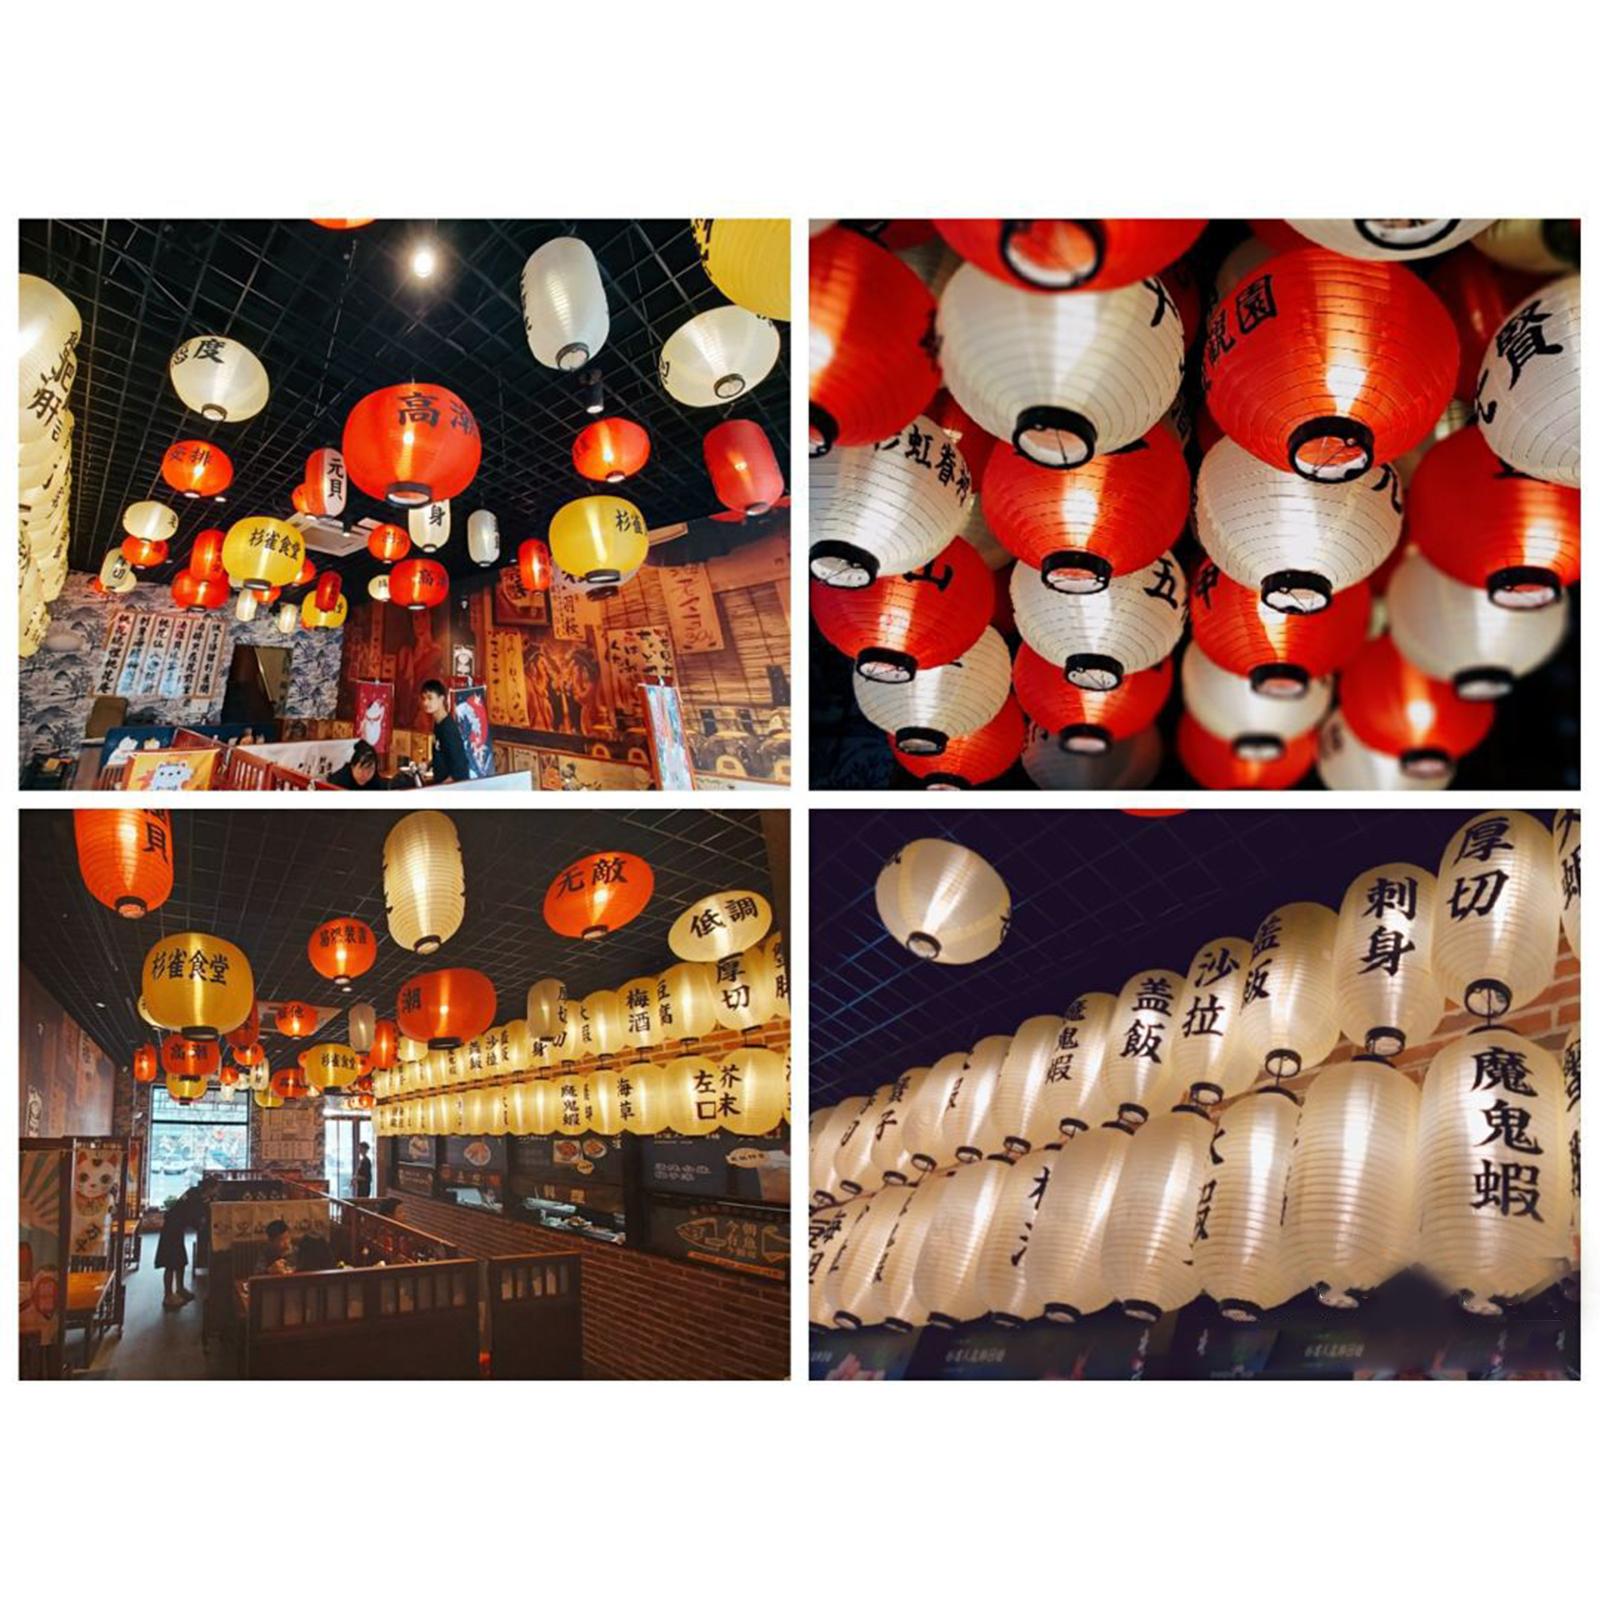 Lantern Satin Waterproof Decorations Foldable Japanese for Home Pub Festival 8 inch White B